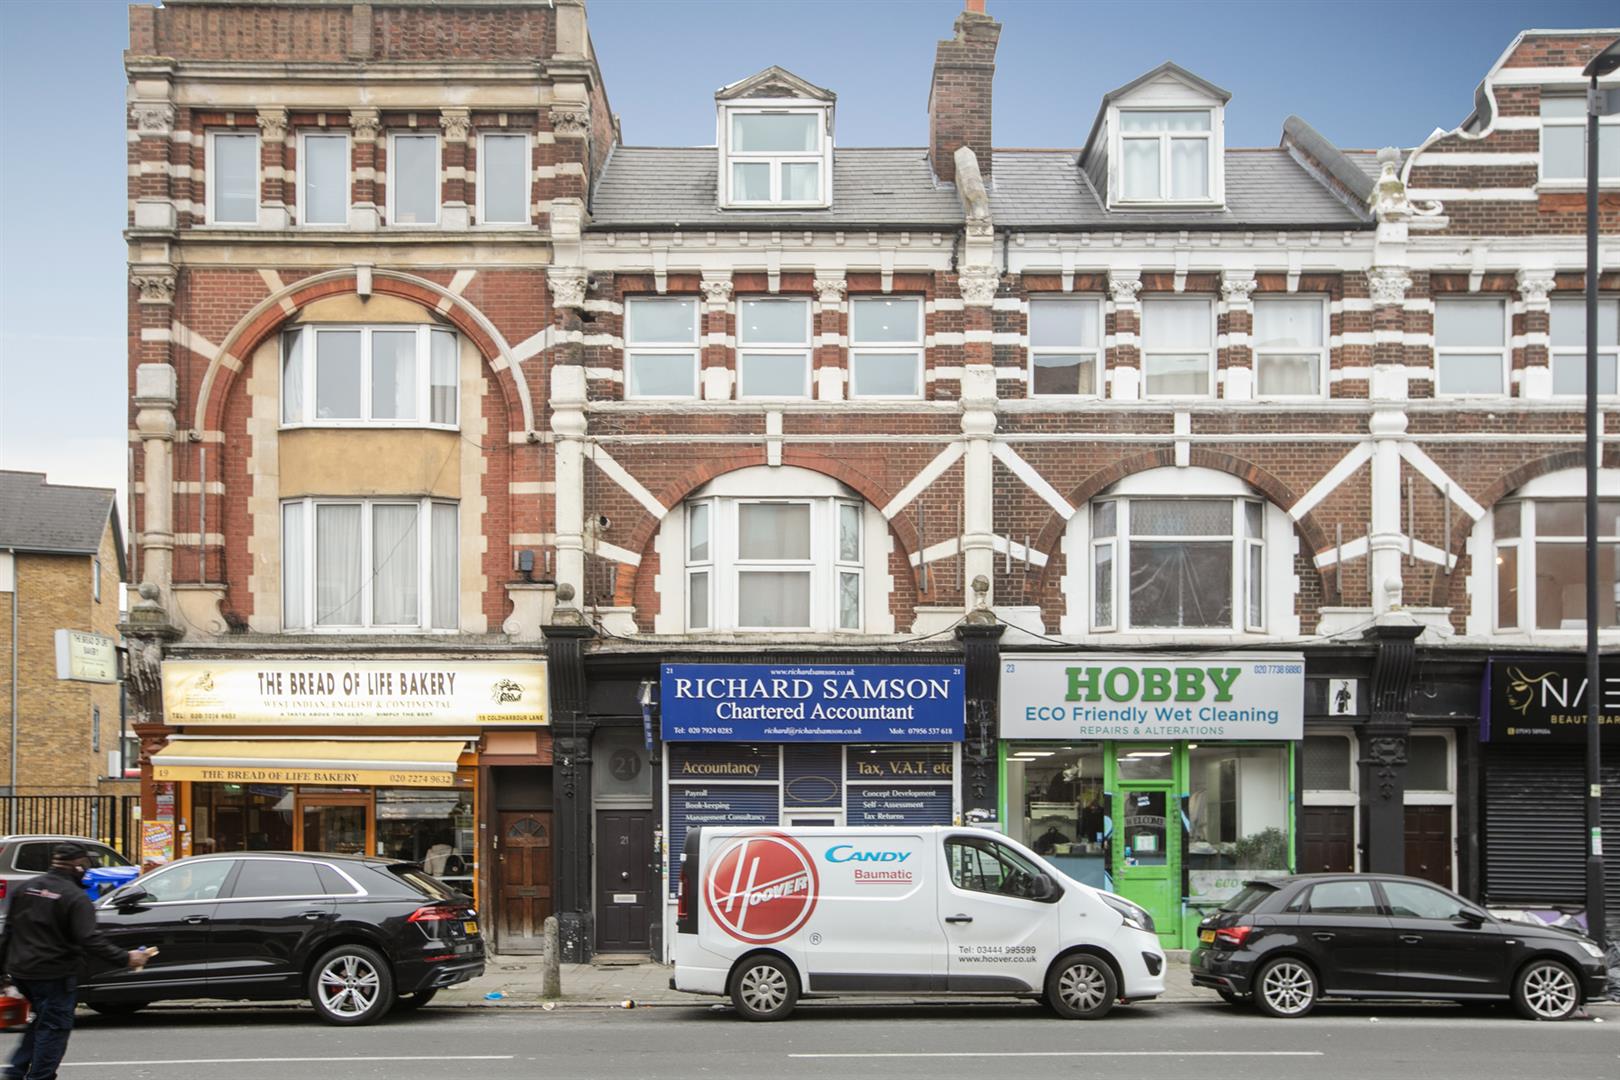 Flat - Conversion For Sale in Coldharbour Lane, Camberwell, SE5 1178 view2